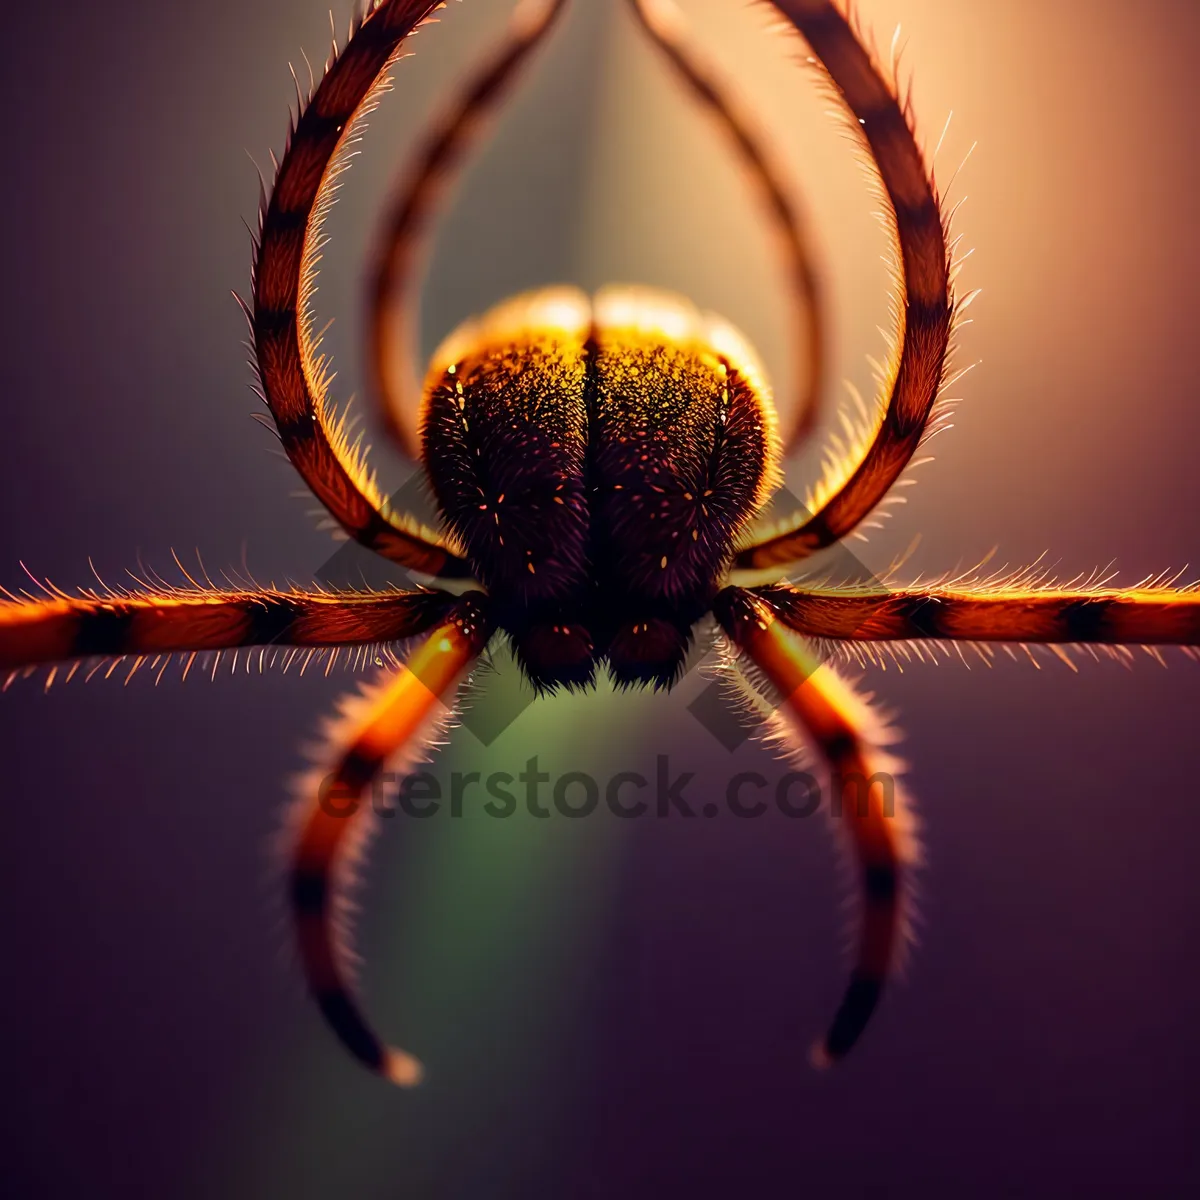 Picture of Black Garden Spider with Intricate Web